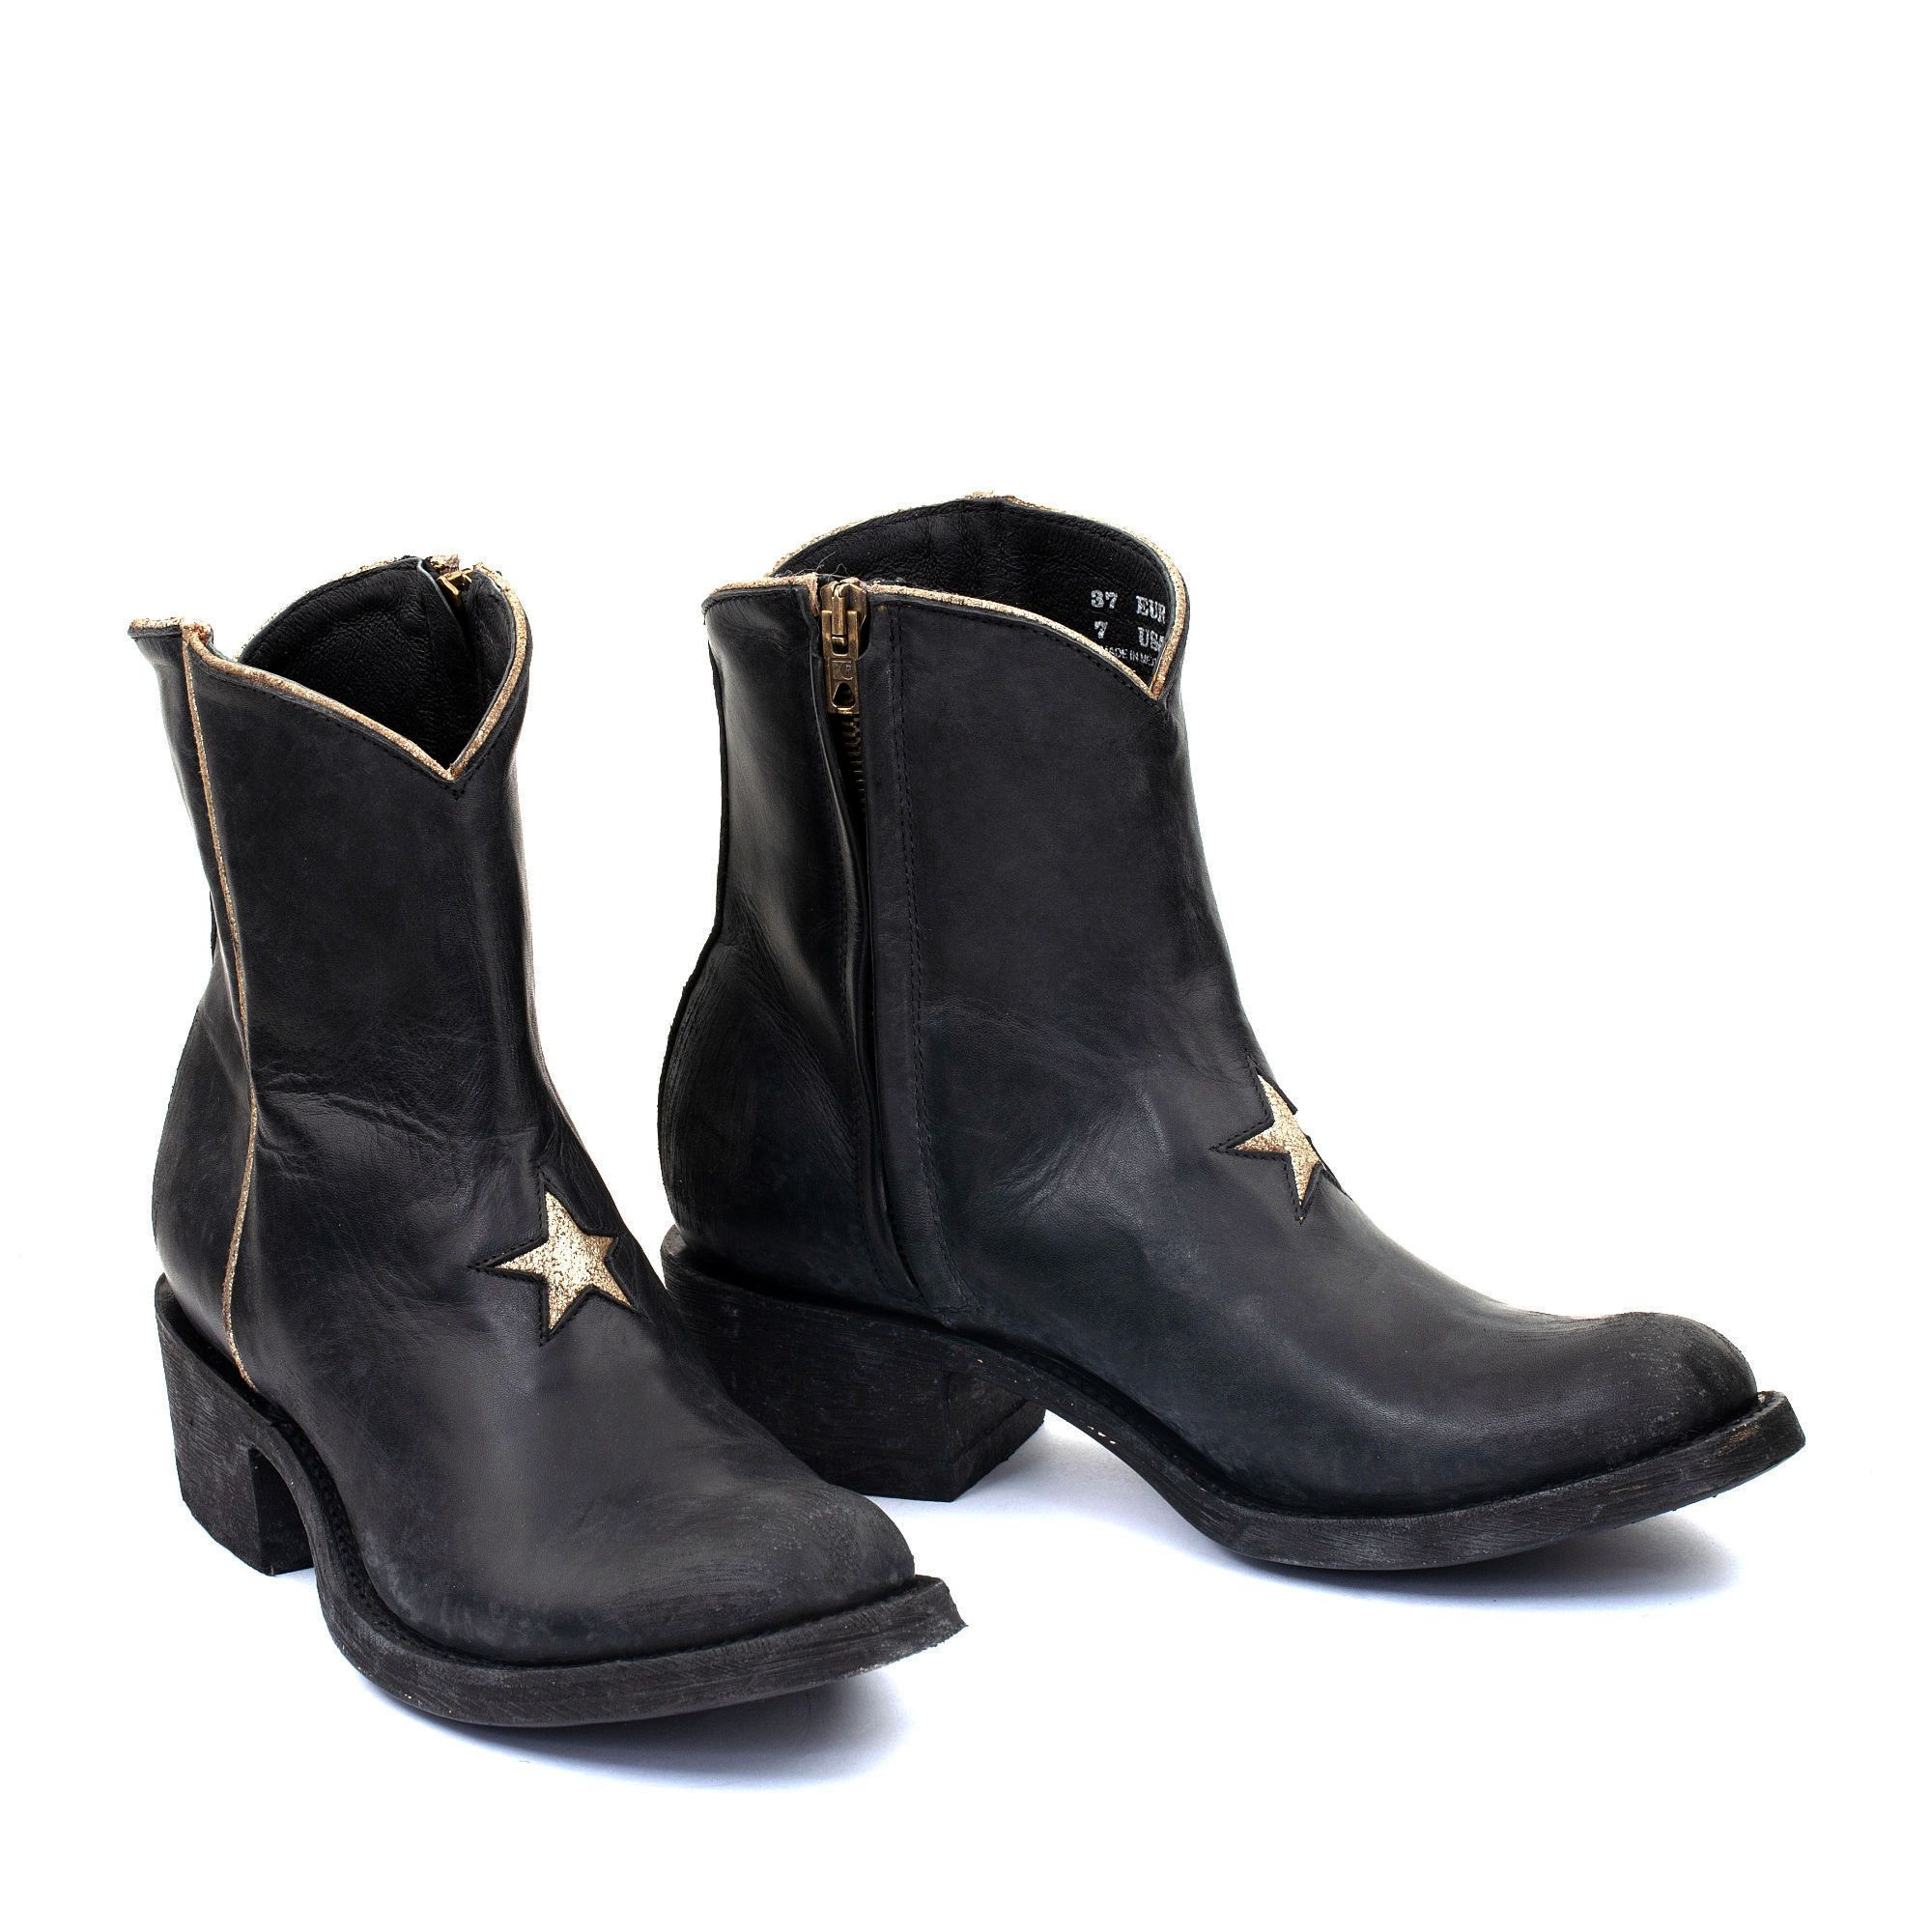 STAR BLACK / FUSIL ROUNDED TOE ANKLE BOOTS WITH STAR  AND SIDE ZIP CLOSURE  Total heel height 1.8 Inches  100% cow leather  Colo